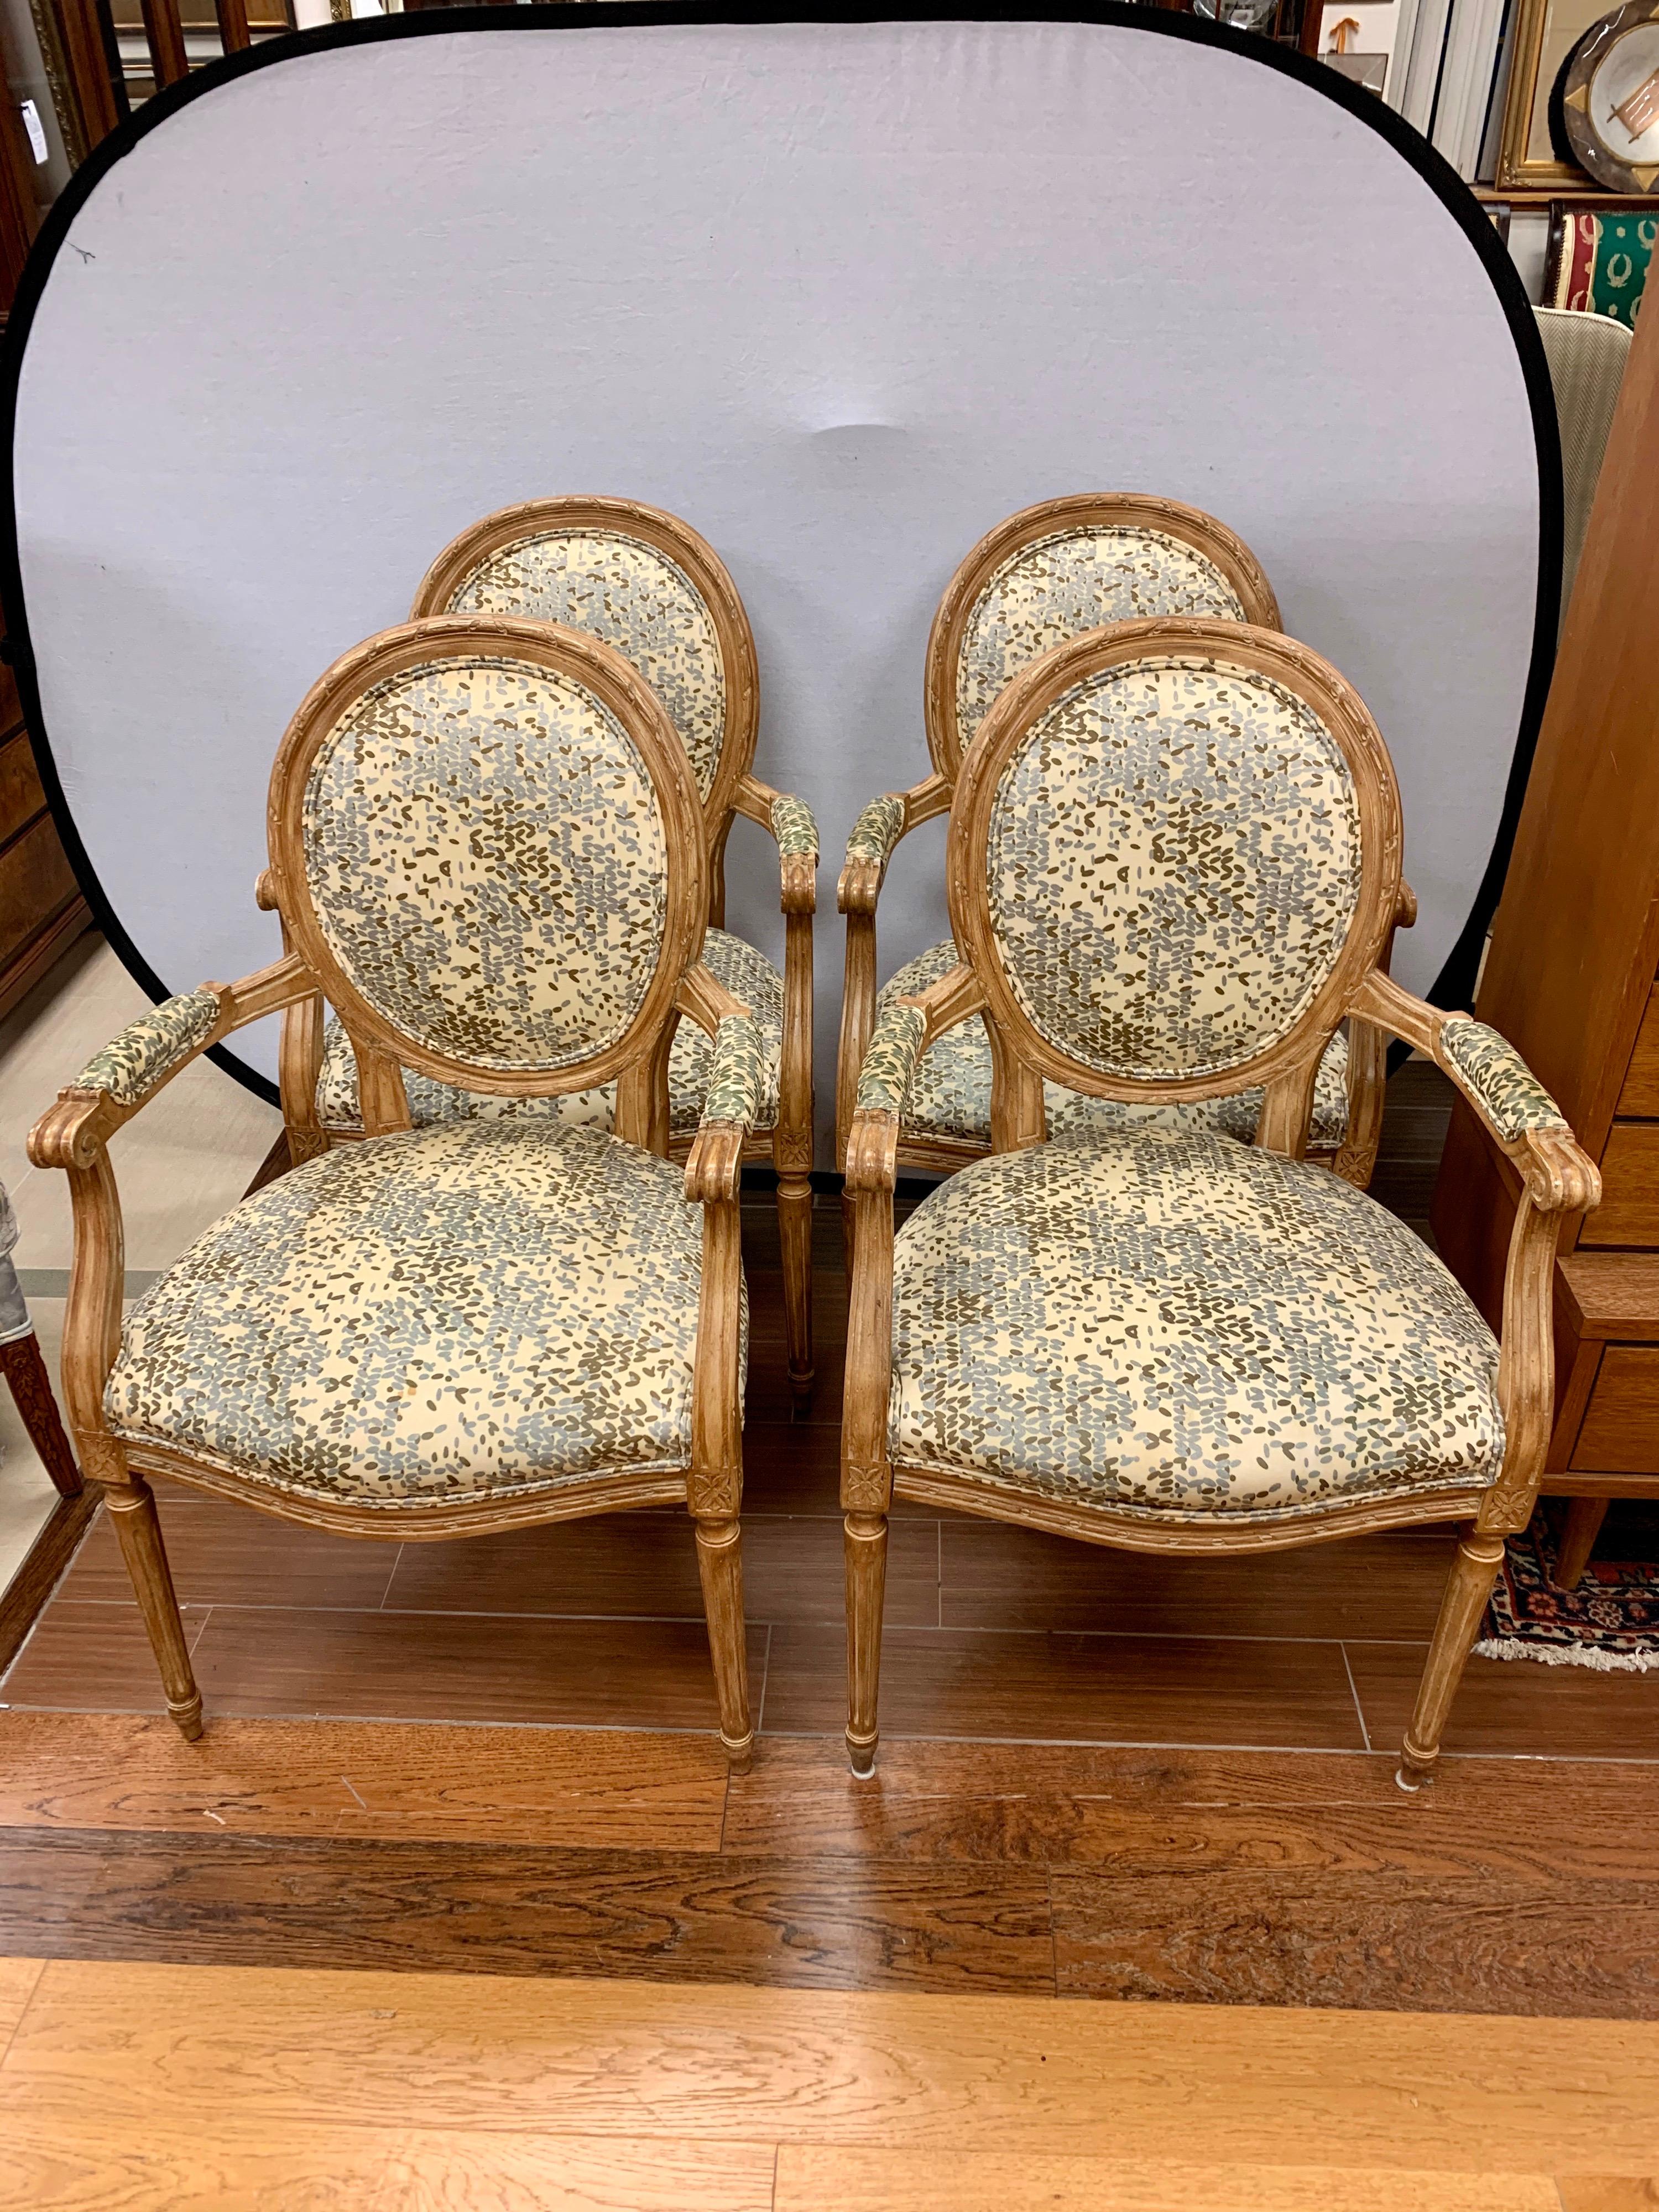 Elegant and ornate set of four matching Louis XVI oval back armchairs with Kravet fabric. Upholstered on the arms, seat, and backrest. All dimensions are below.